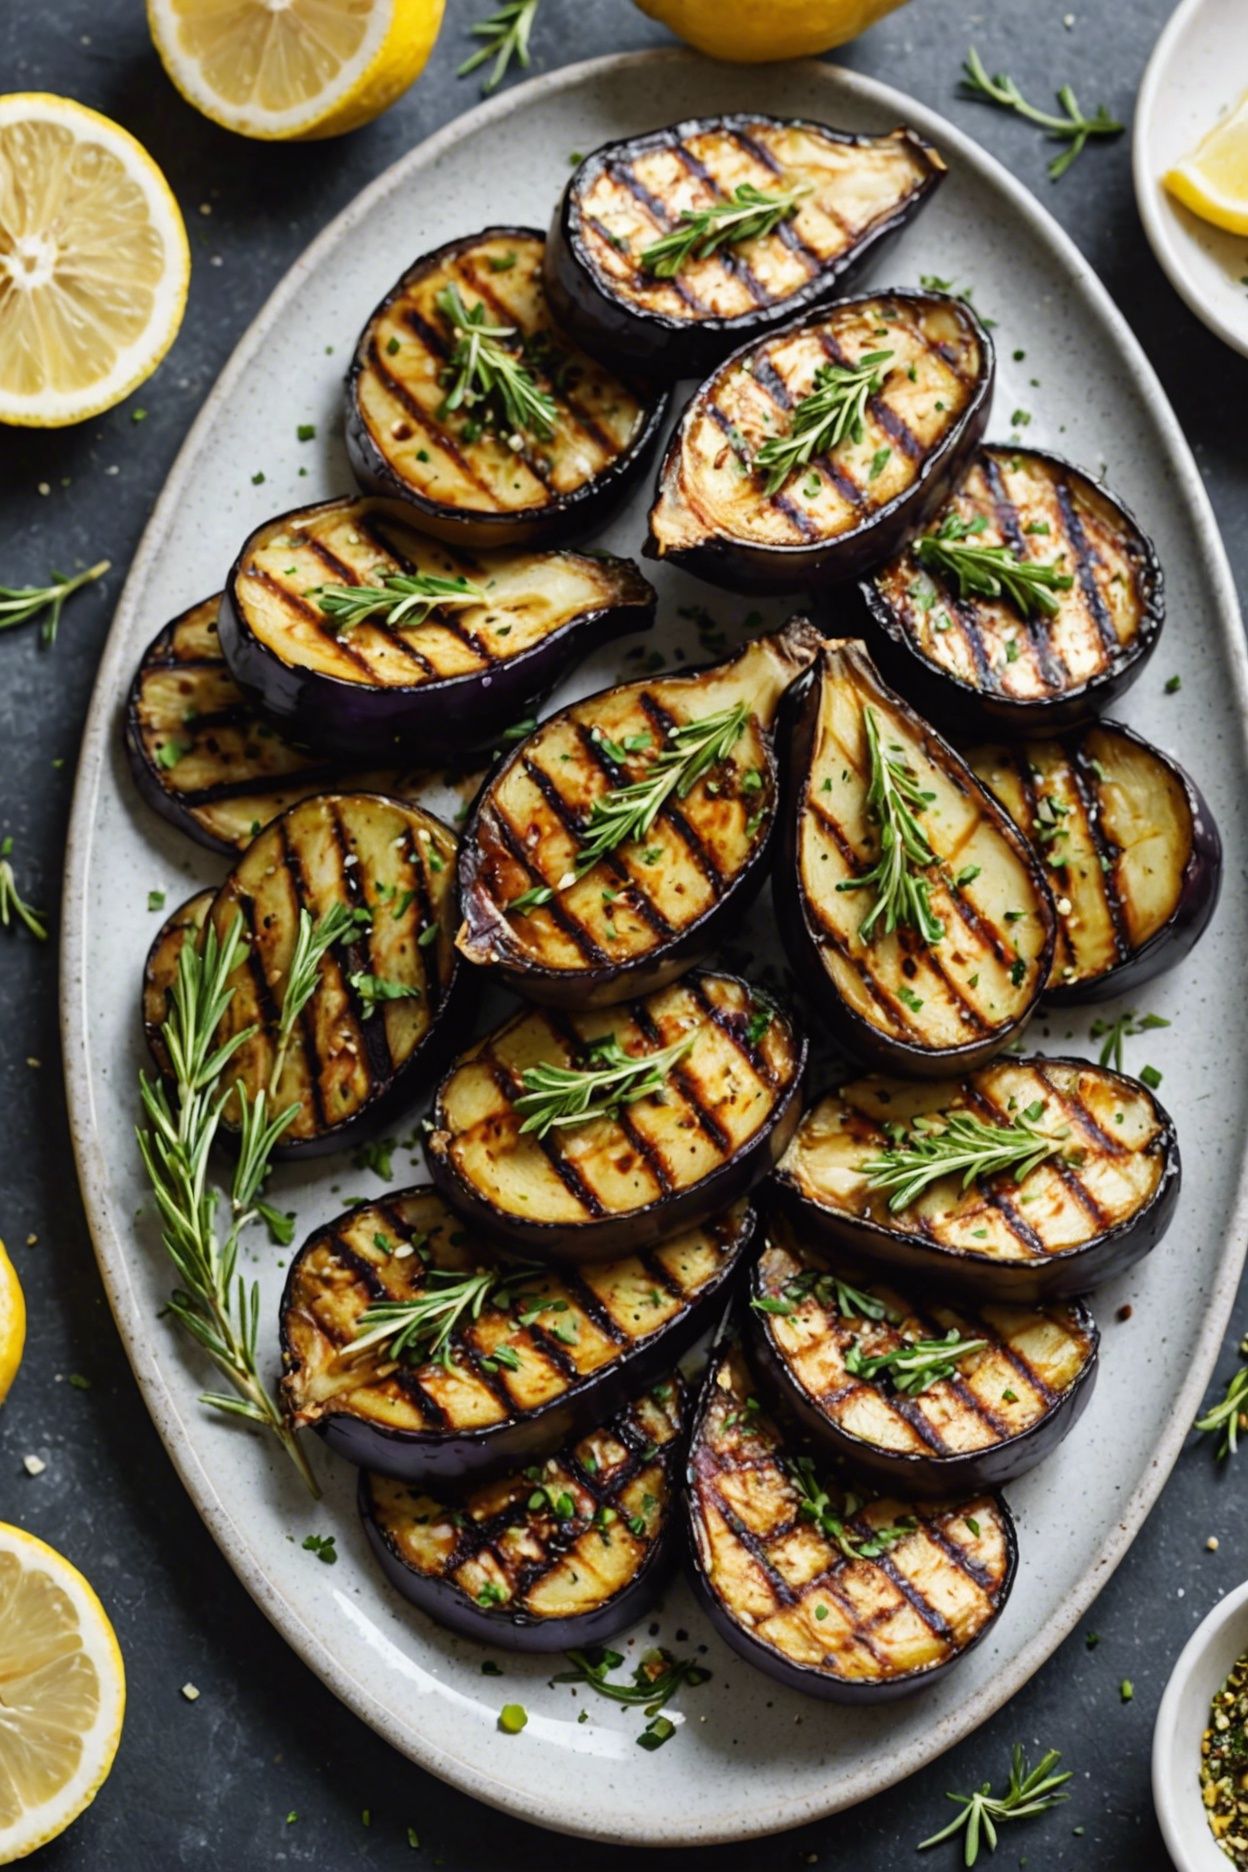 Grilled Eggplant With Aromatic Herbs